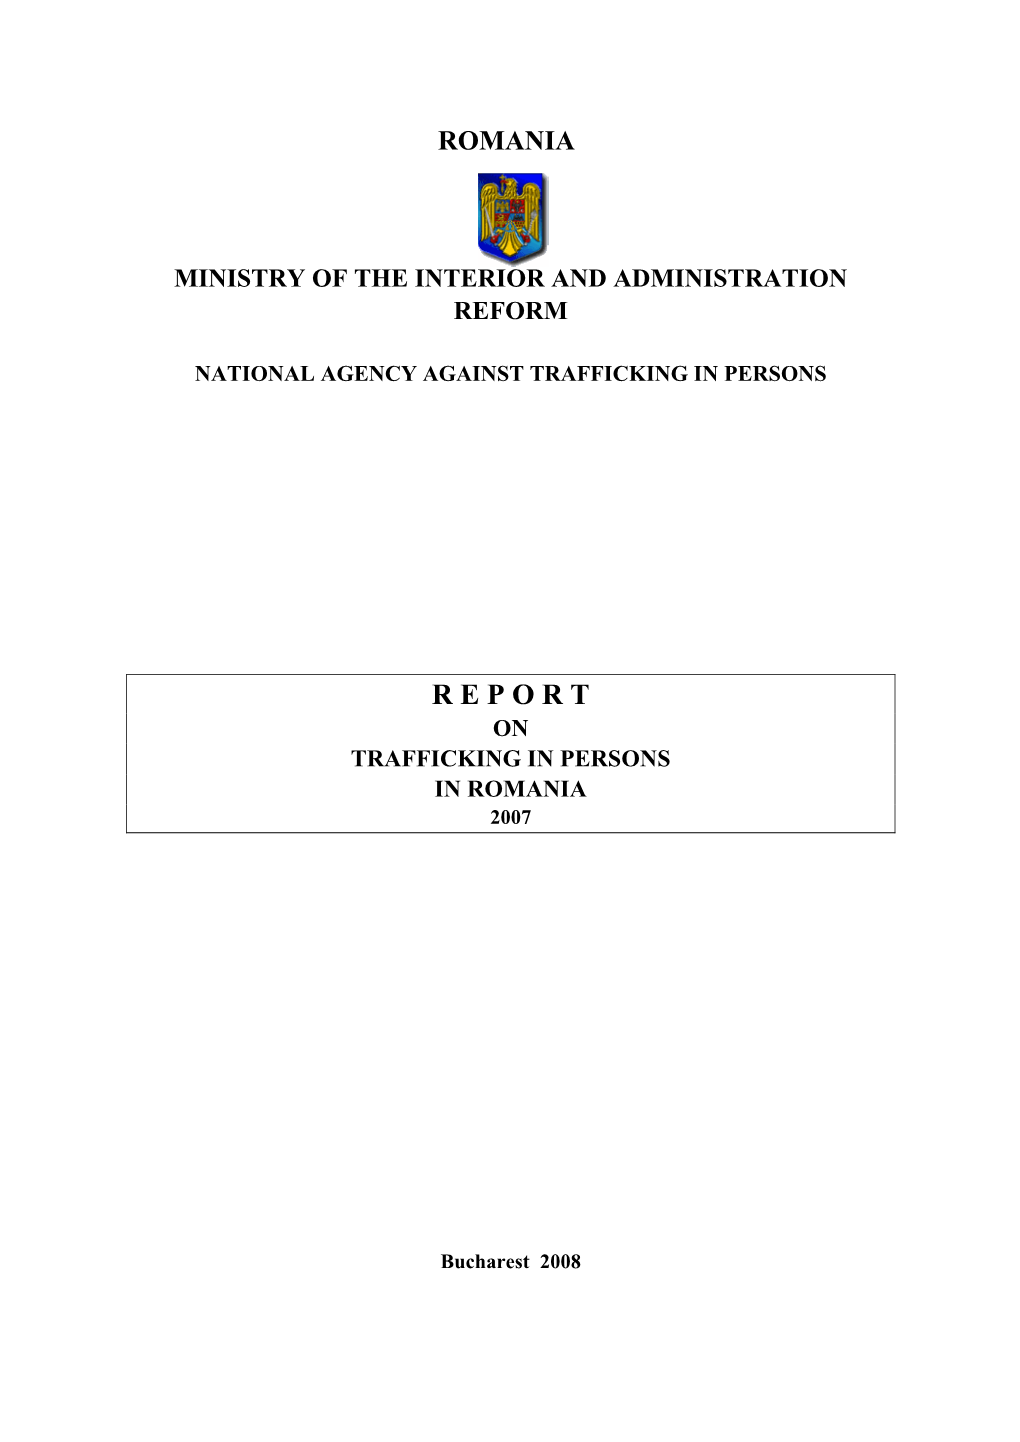 Report on Trafficking in Persons in Romania, Ministry